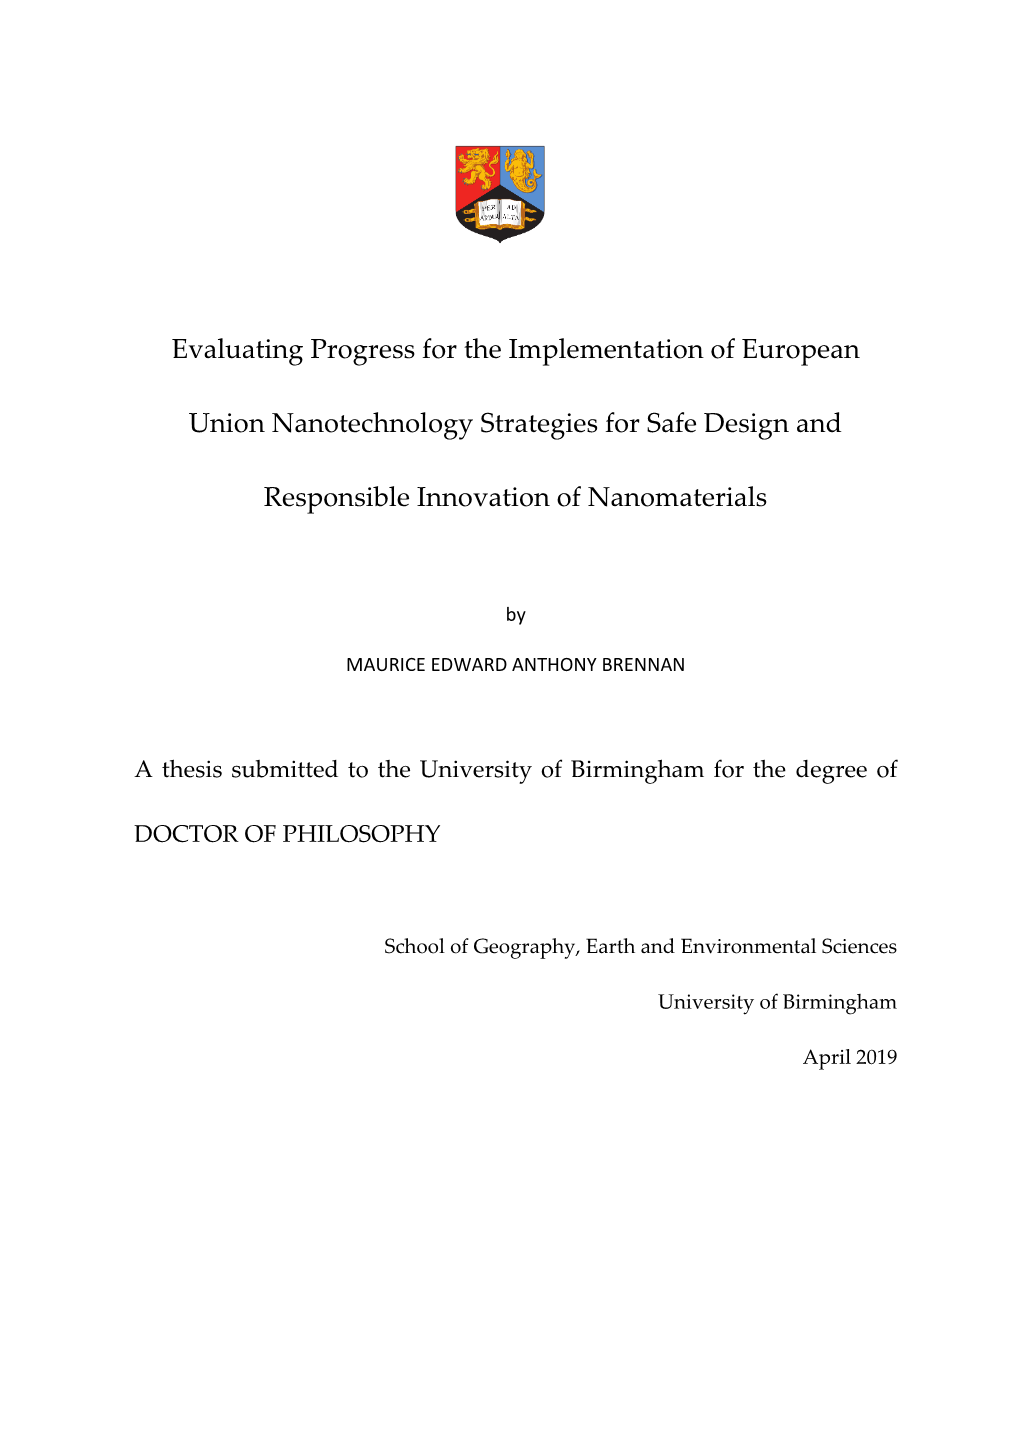 Evaluating Progress for the Implementation of European Union